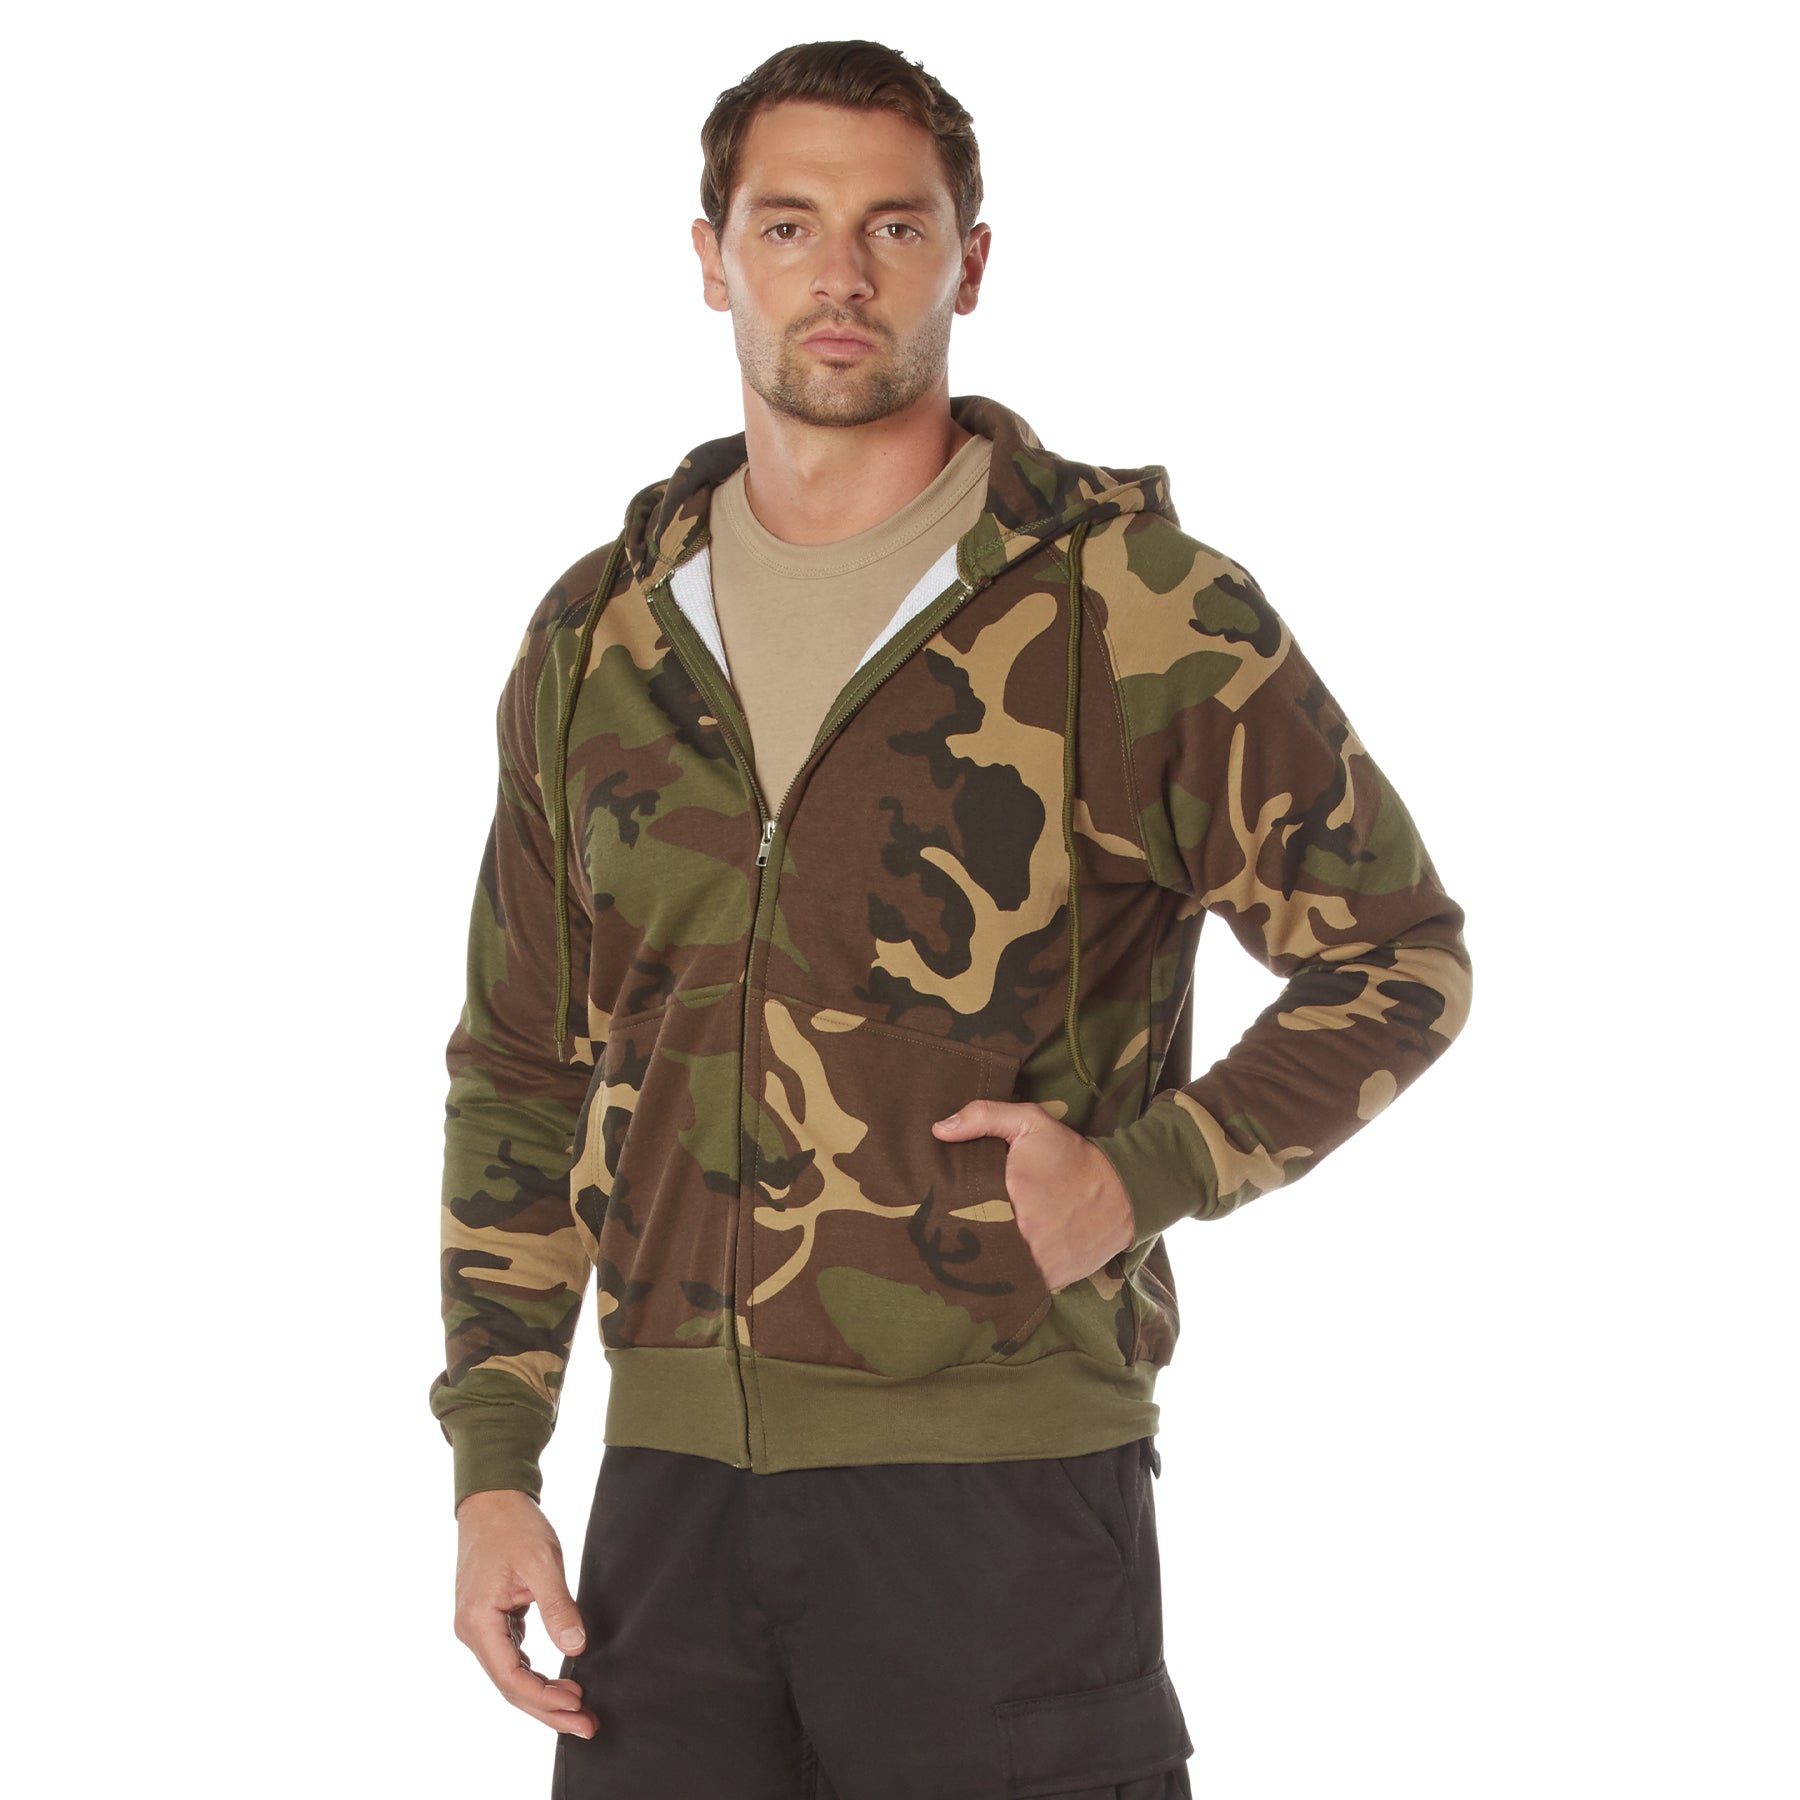 Poly/Cotton Camo Thermal-Lined Zipper Hooded Sweatshirts